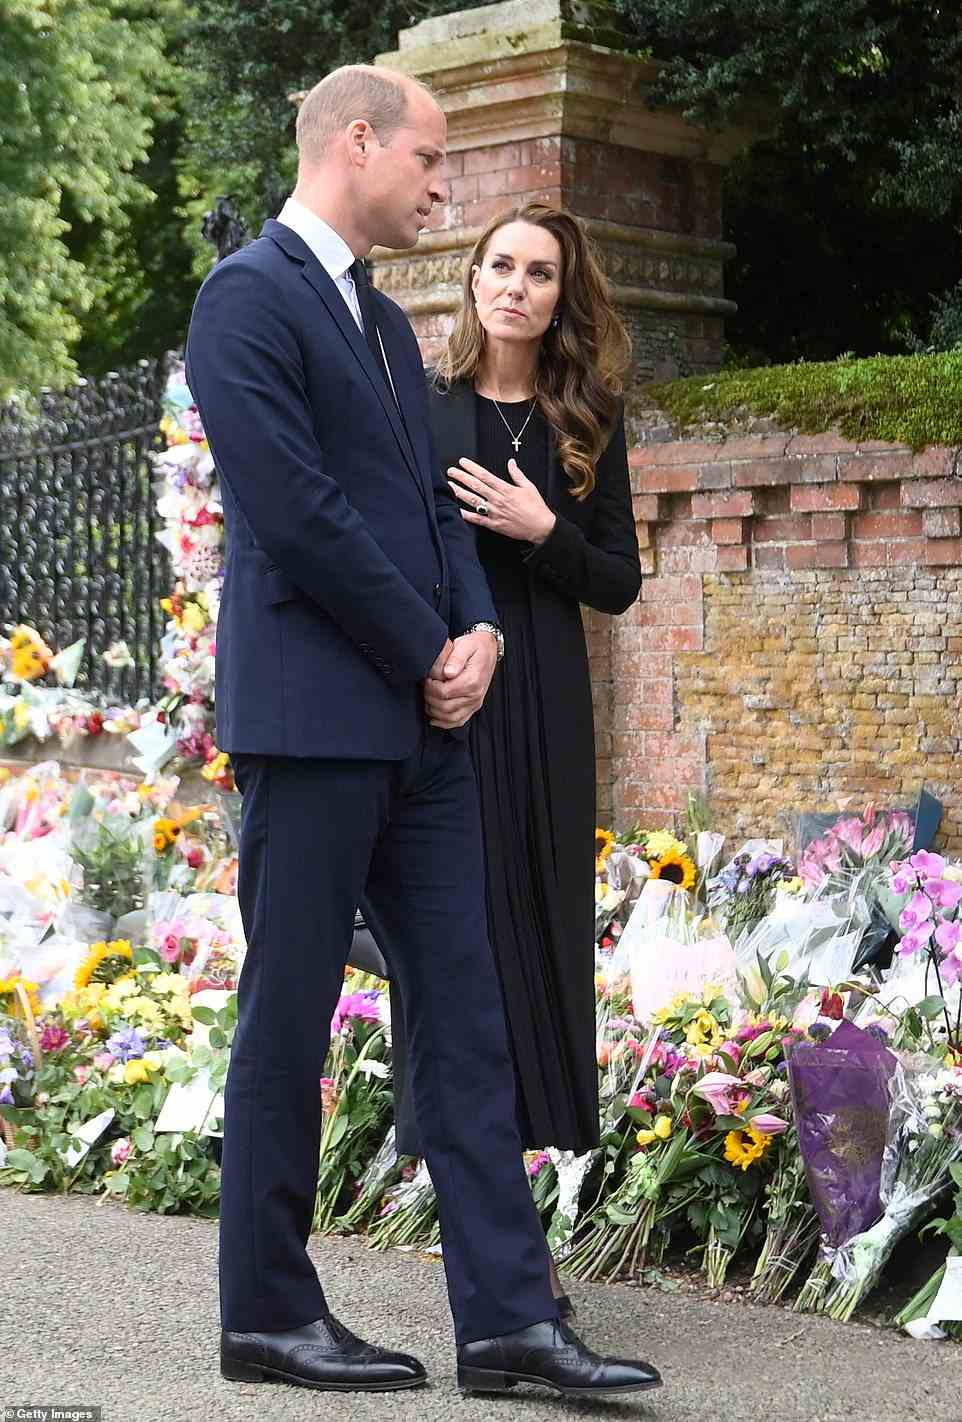 Prince William, Prince of Wales and Catherine, Princess of Wales, view floral tributes placed outside the Sandringham Estate following the death of Queen Elizabeth II